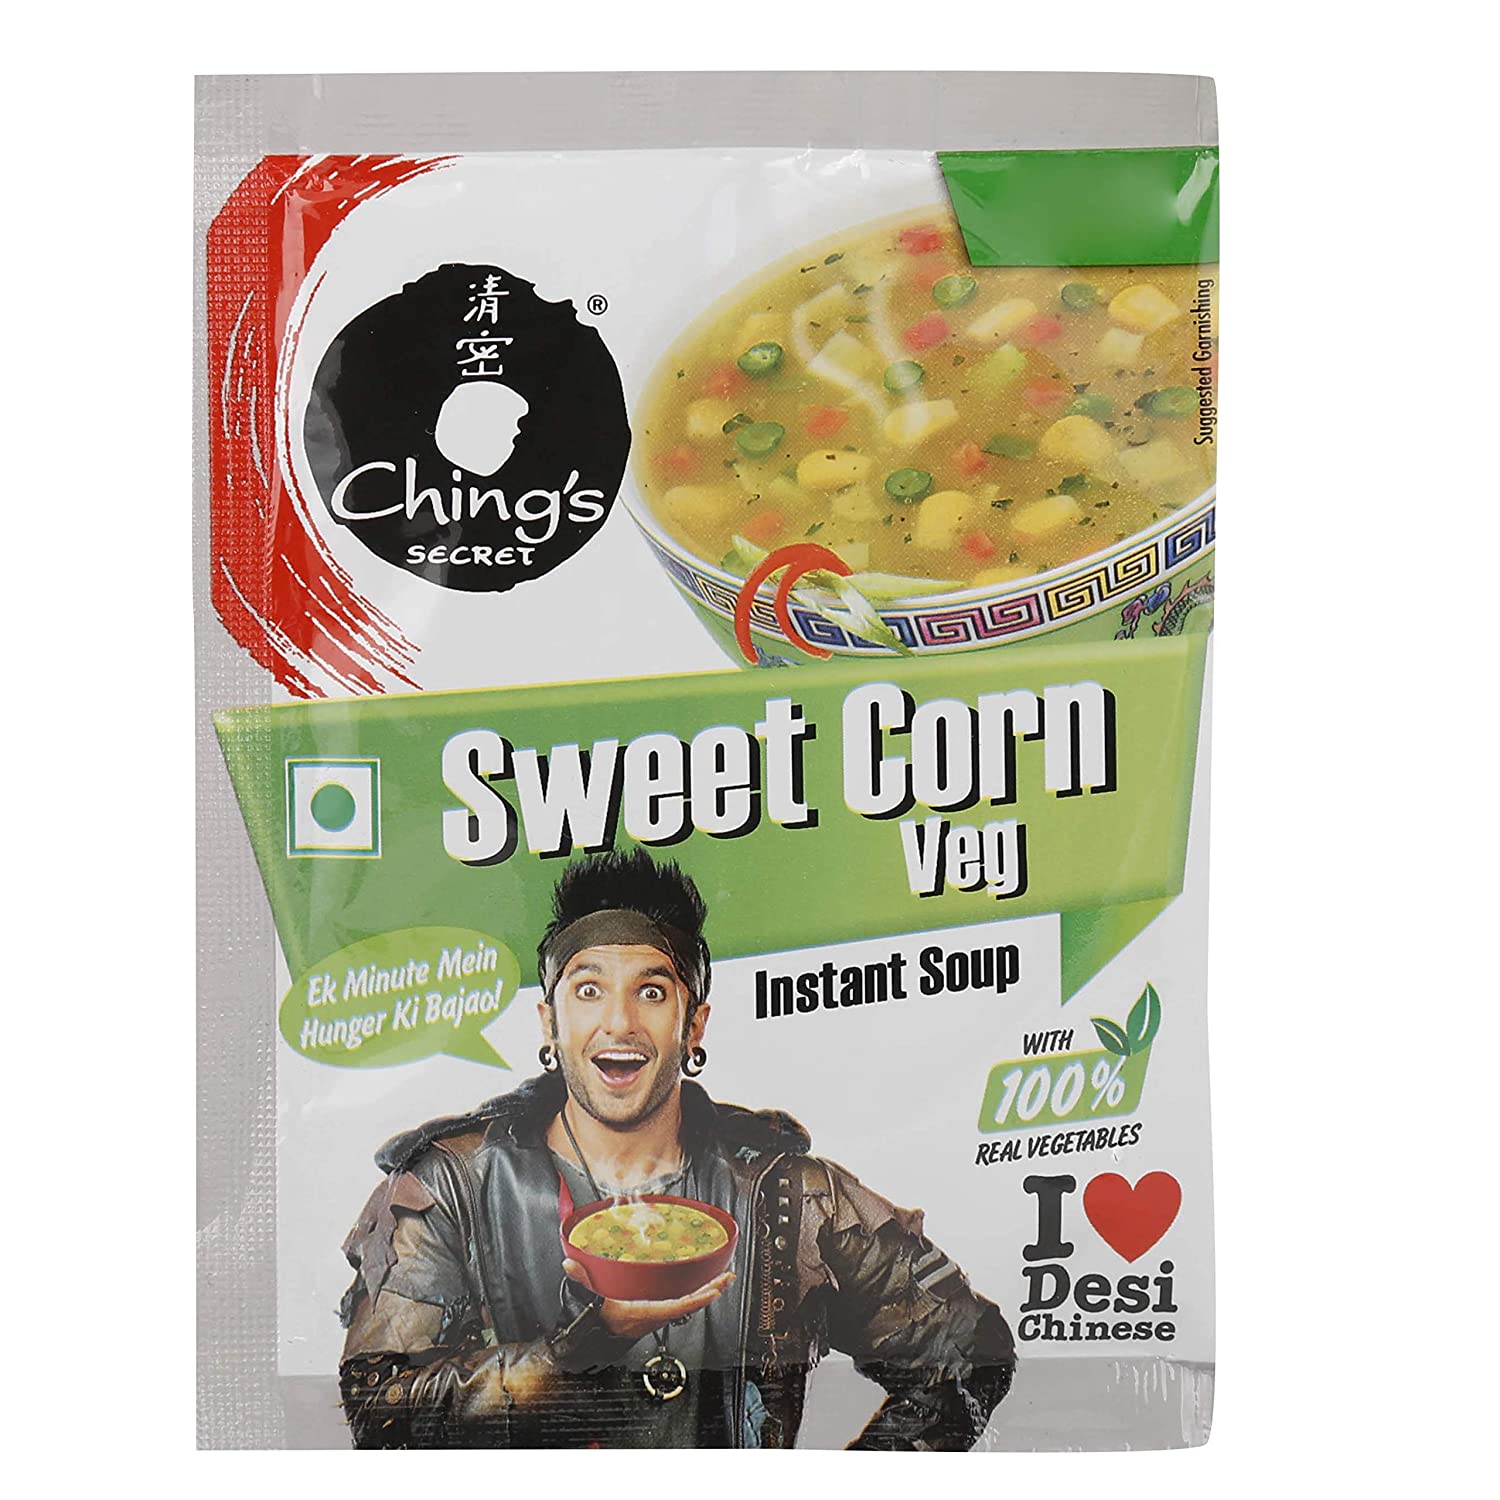 Ching's Instant Soup Sweet Corn Veg Image